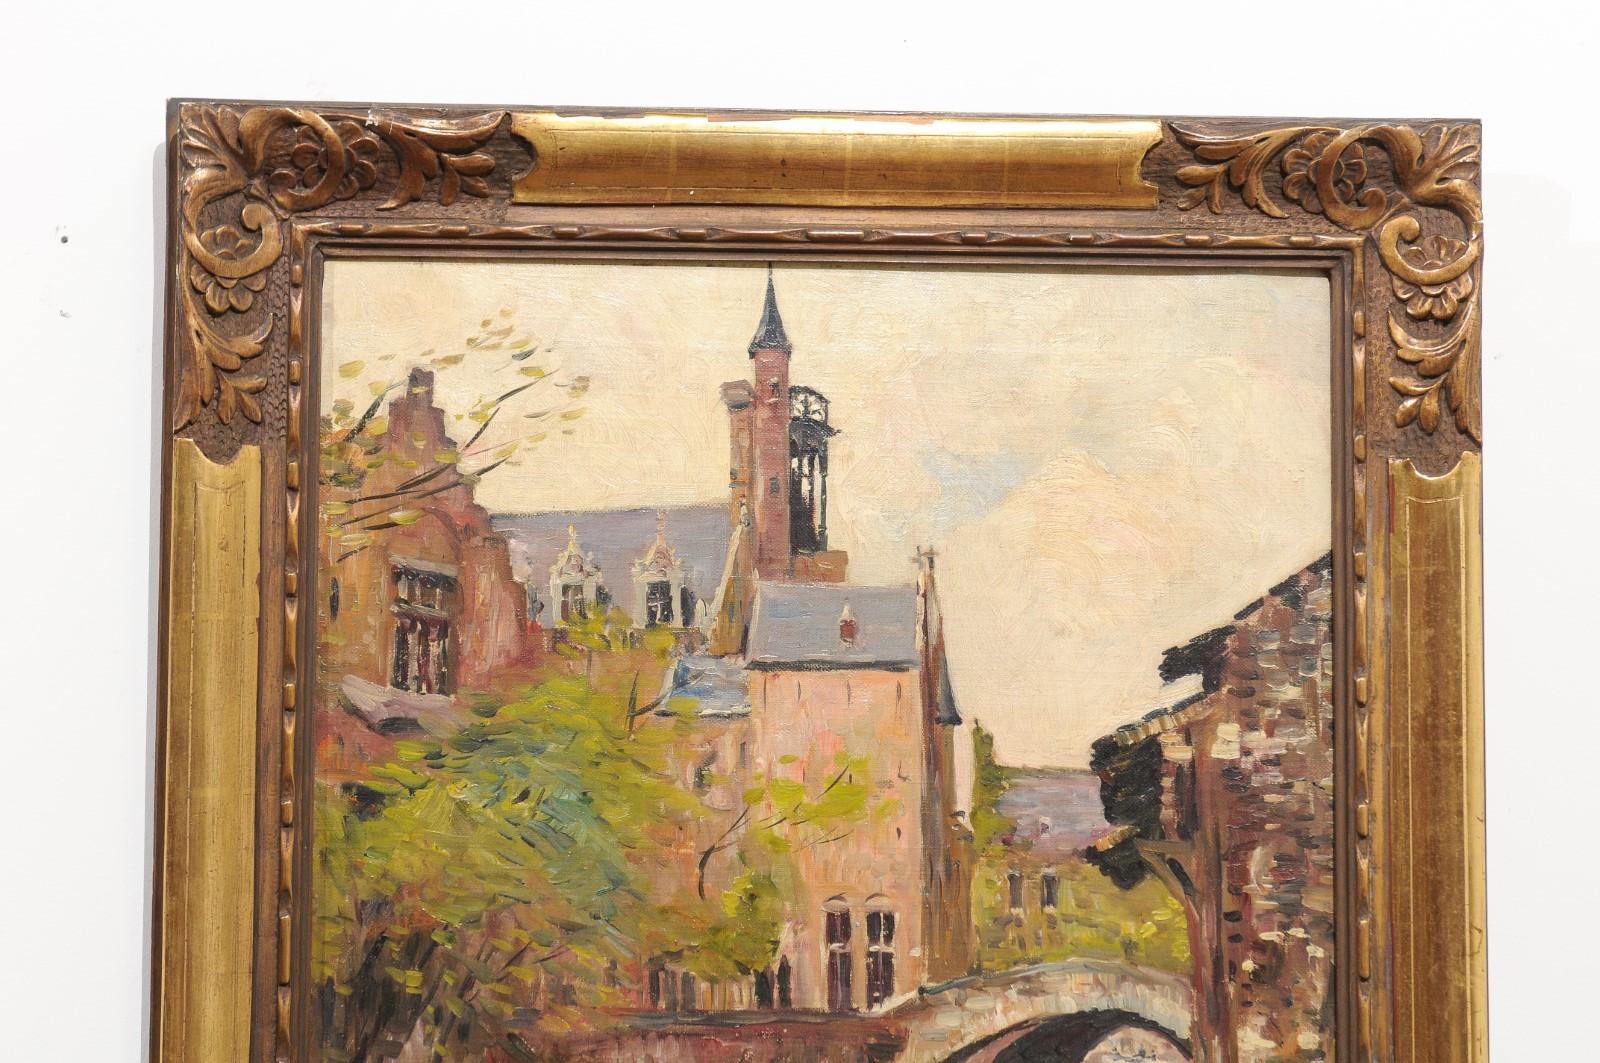 English Oil on Canvas Painting in Carved Frame Depicting a Serene Town Scene 1